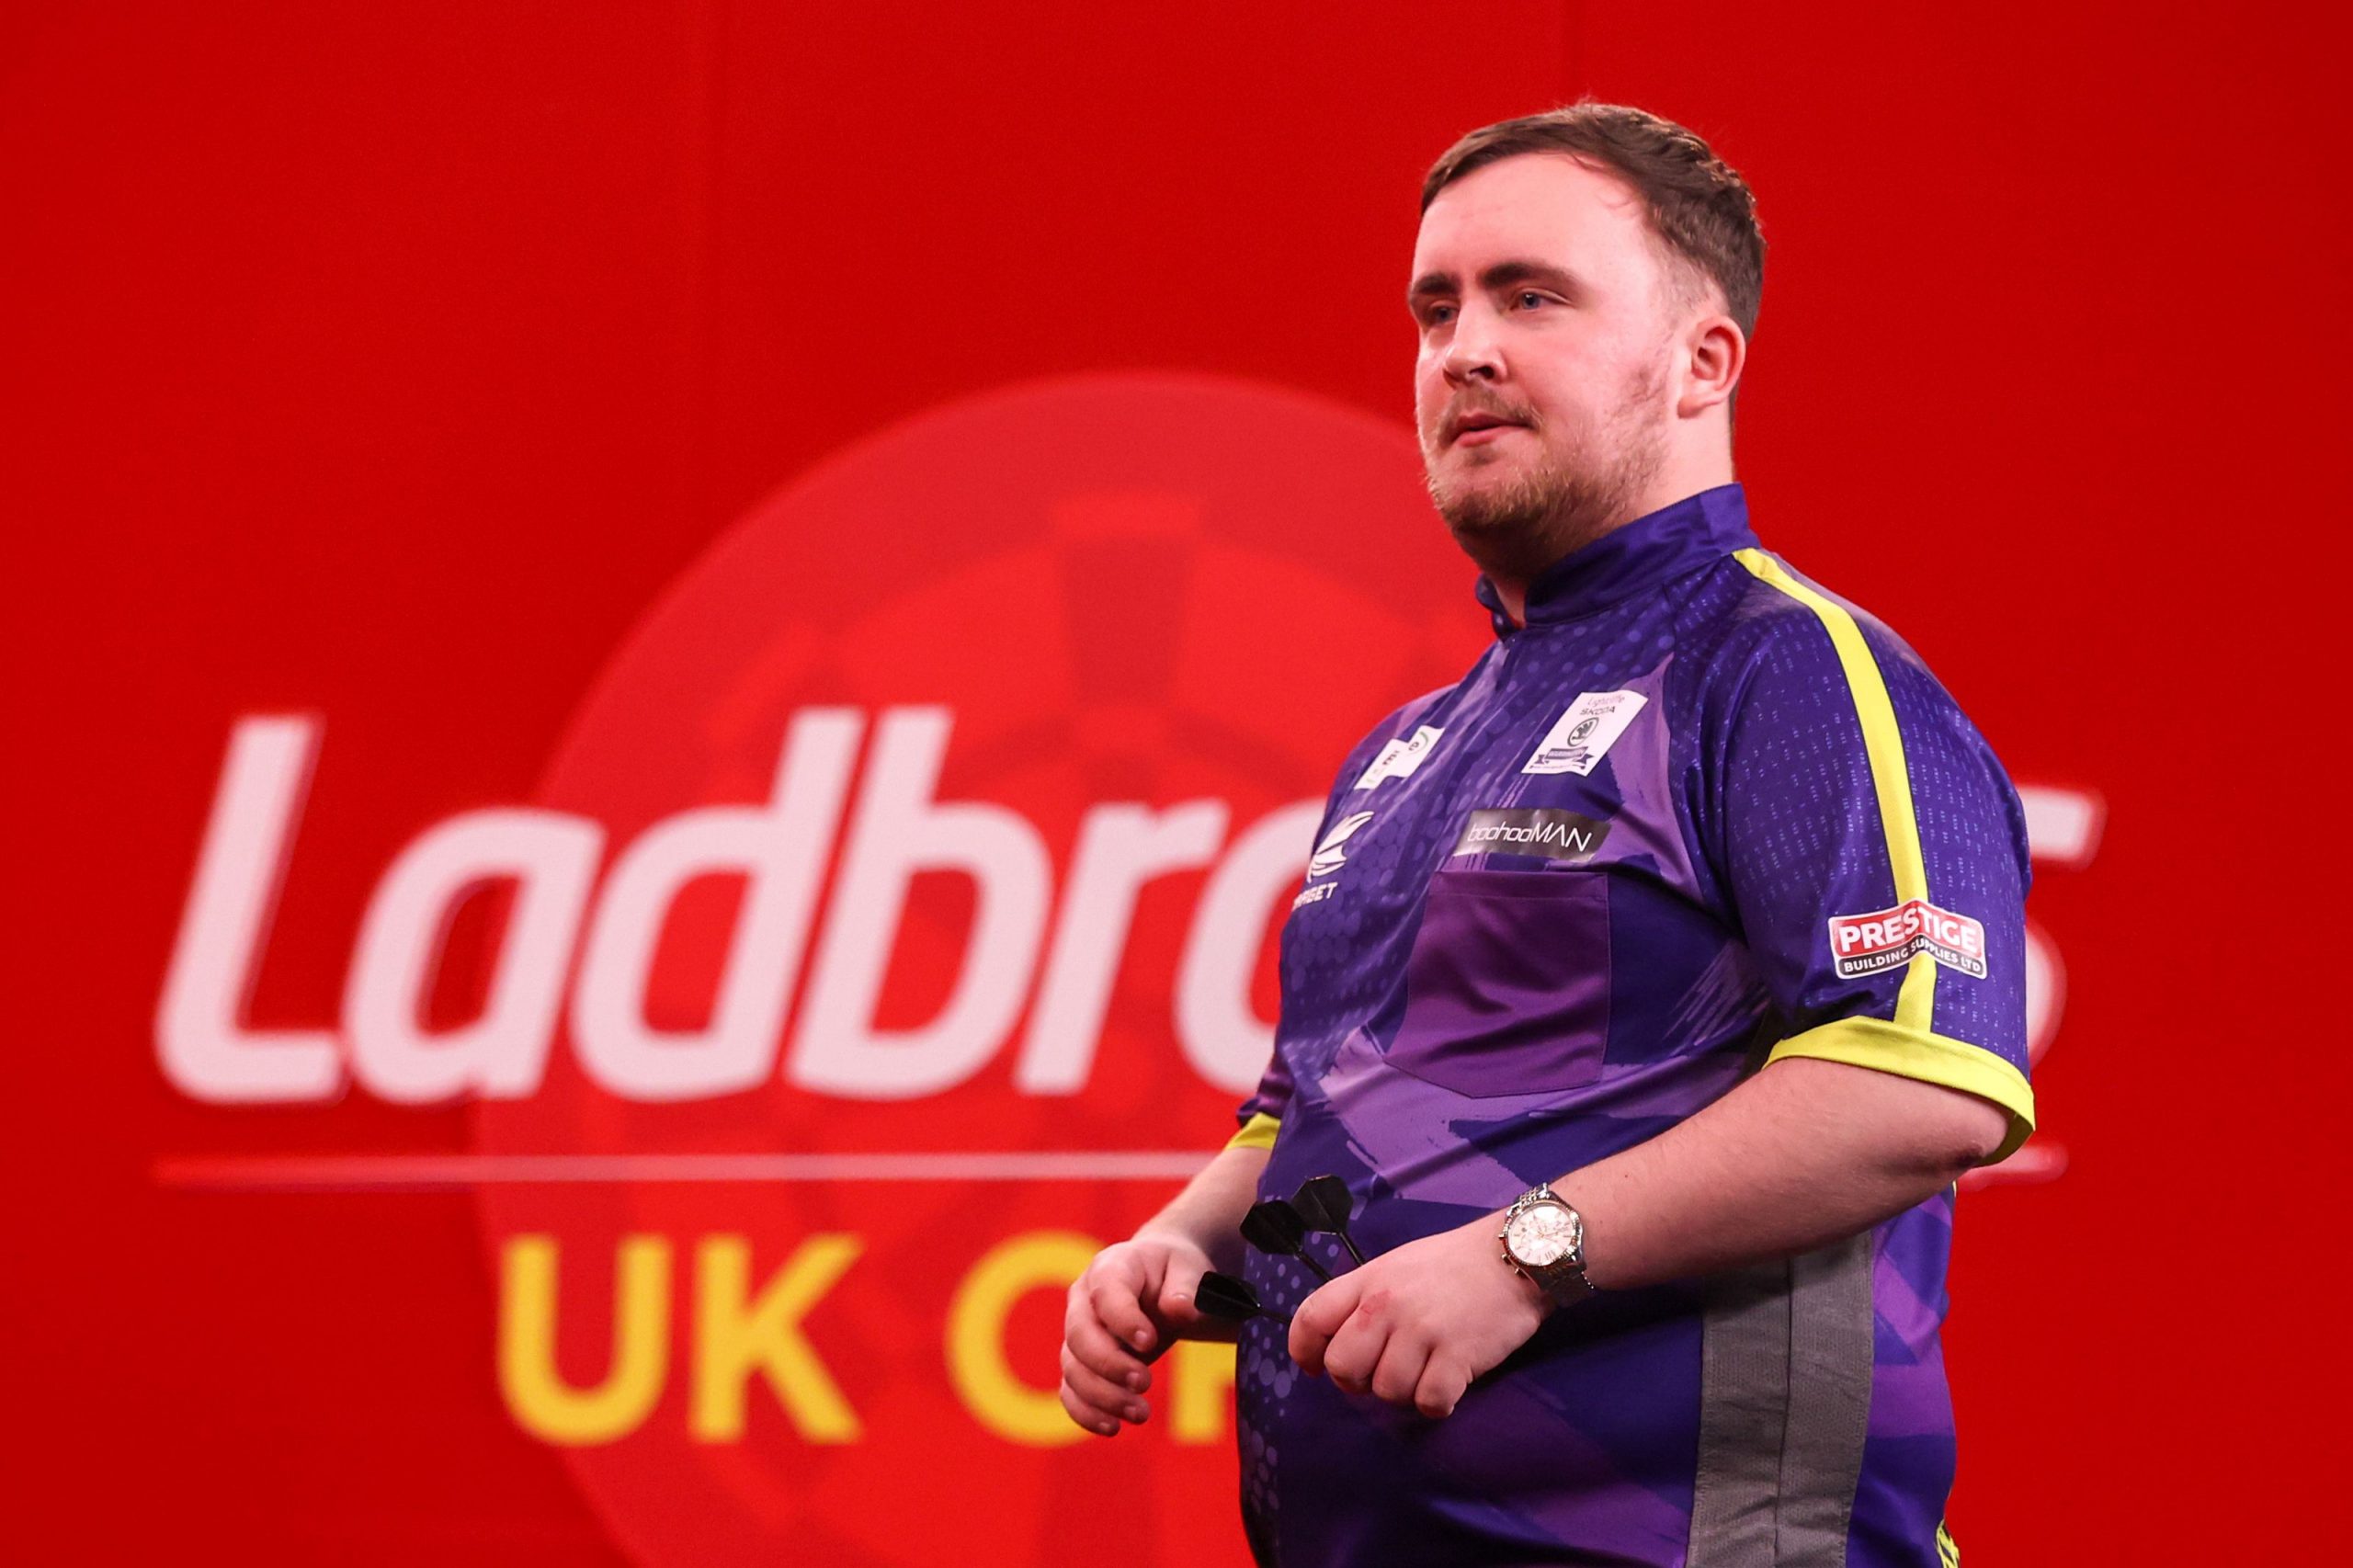 Luke Littler holds his nerve as he WINS at UK Open Darts to reach last 16 after tight match vs Martin Schindler